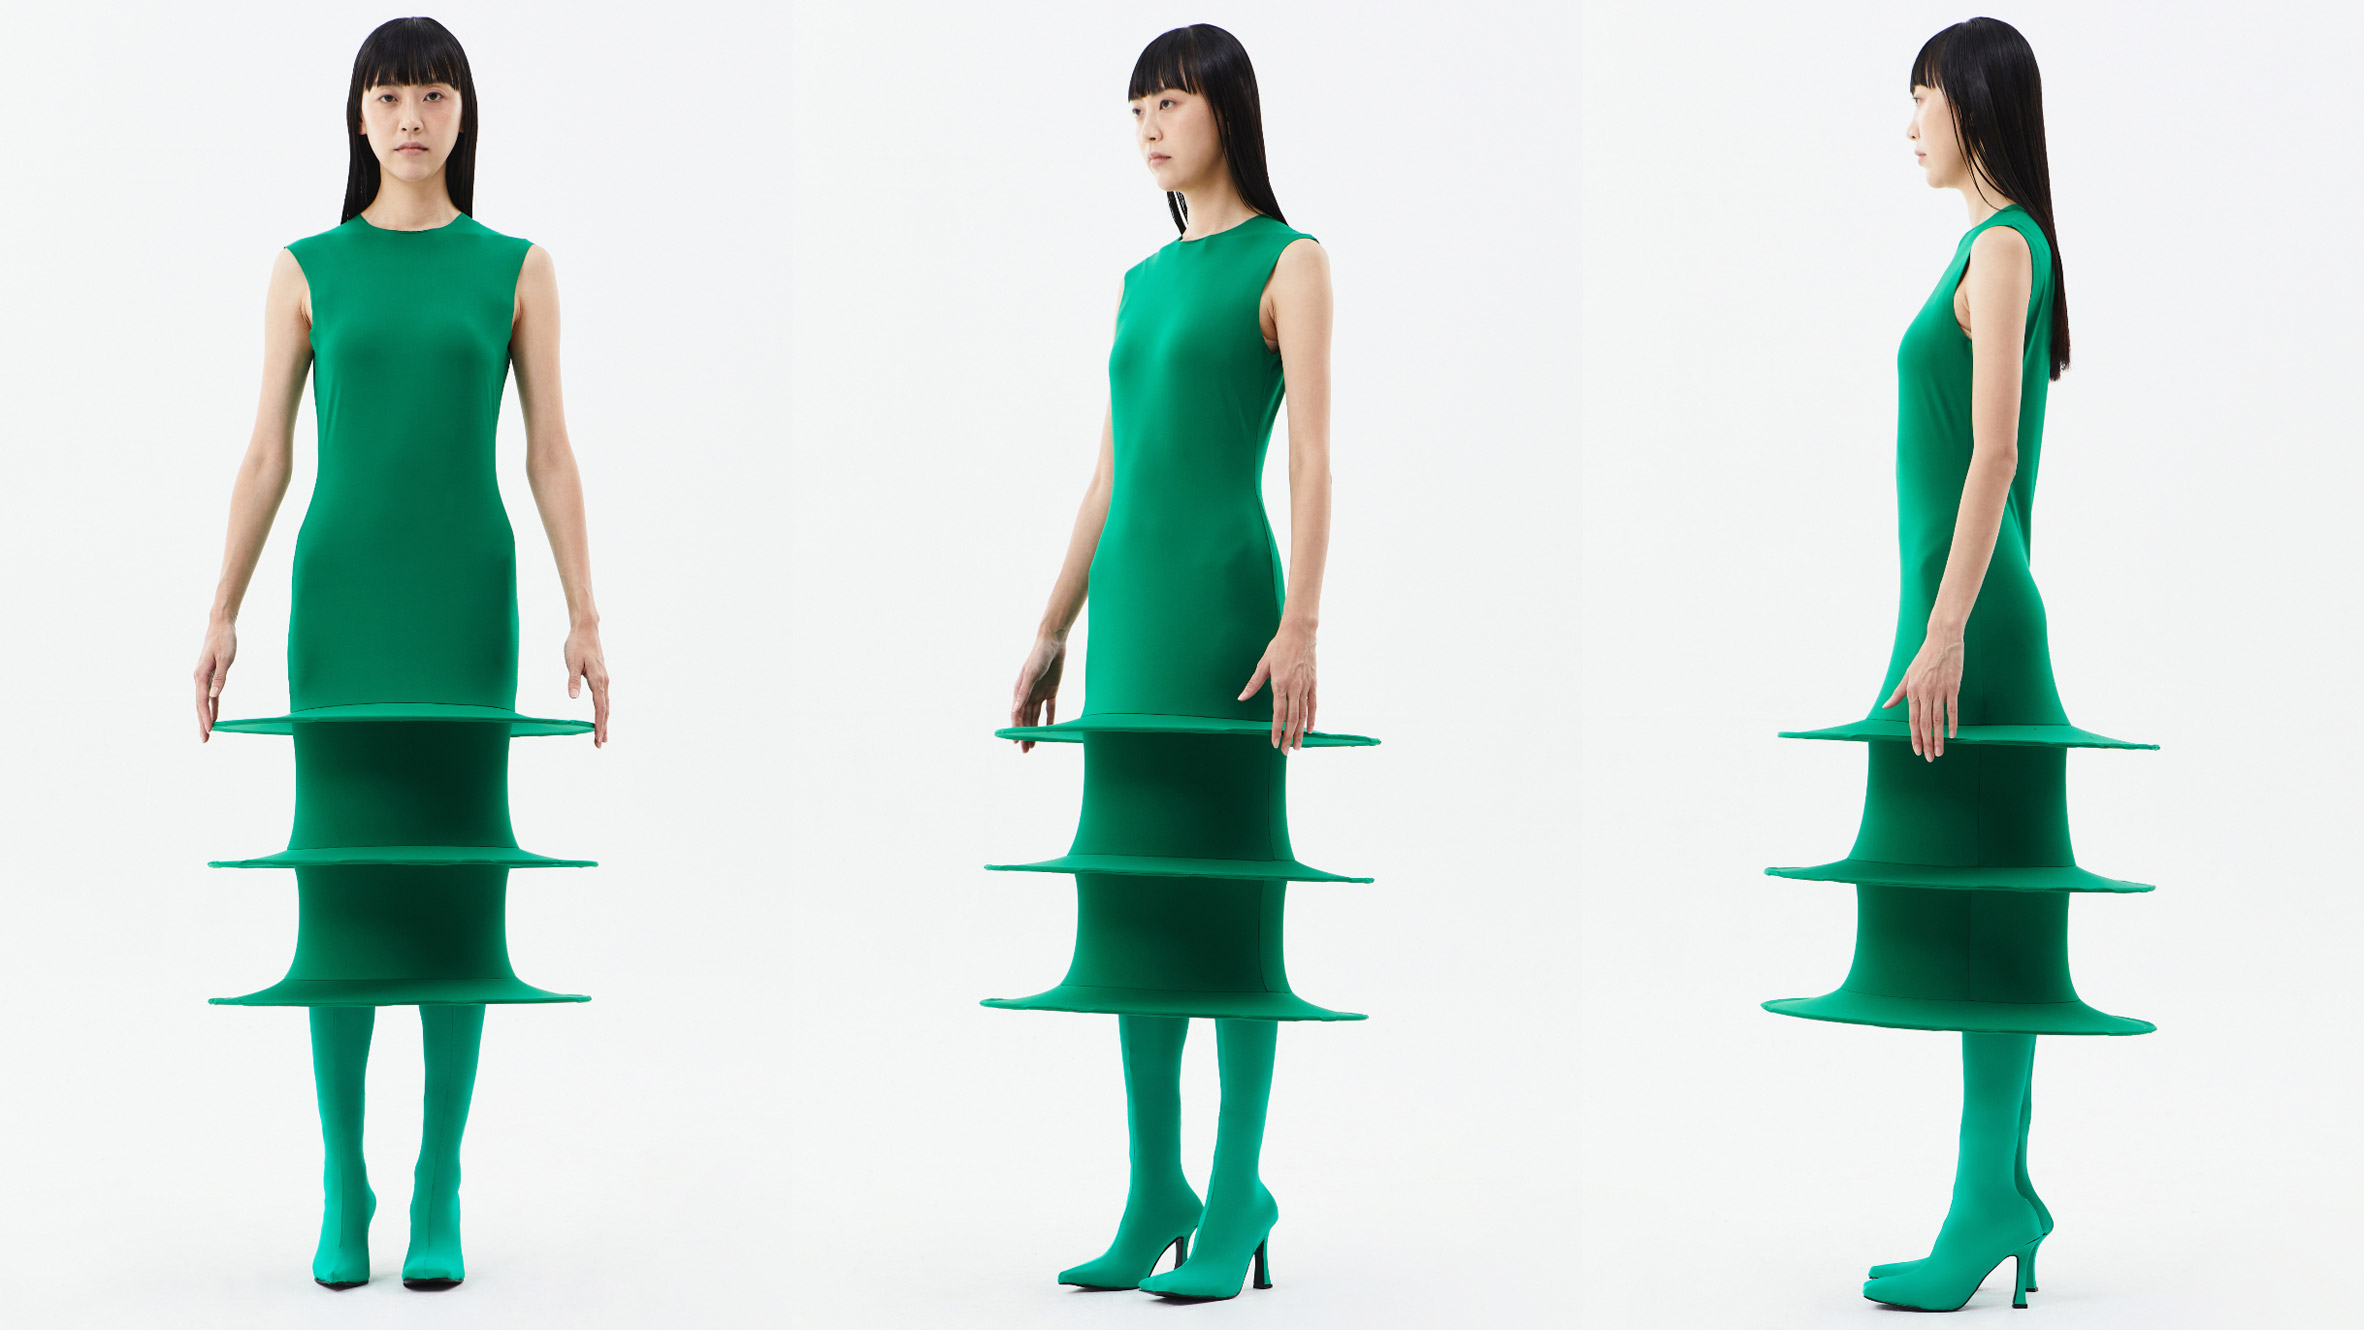 Green A-line dress from Sun Woo's In Between collection